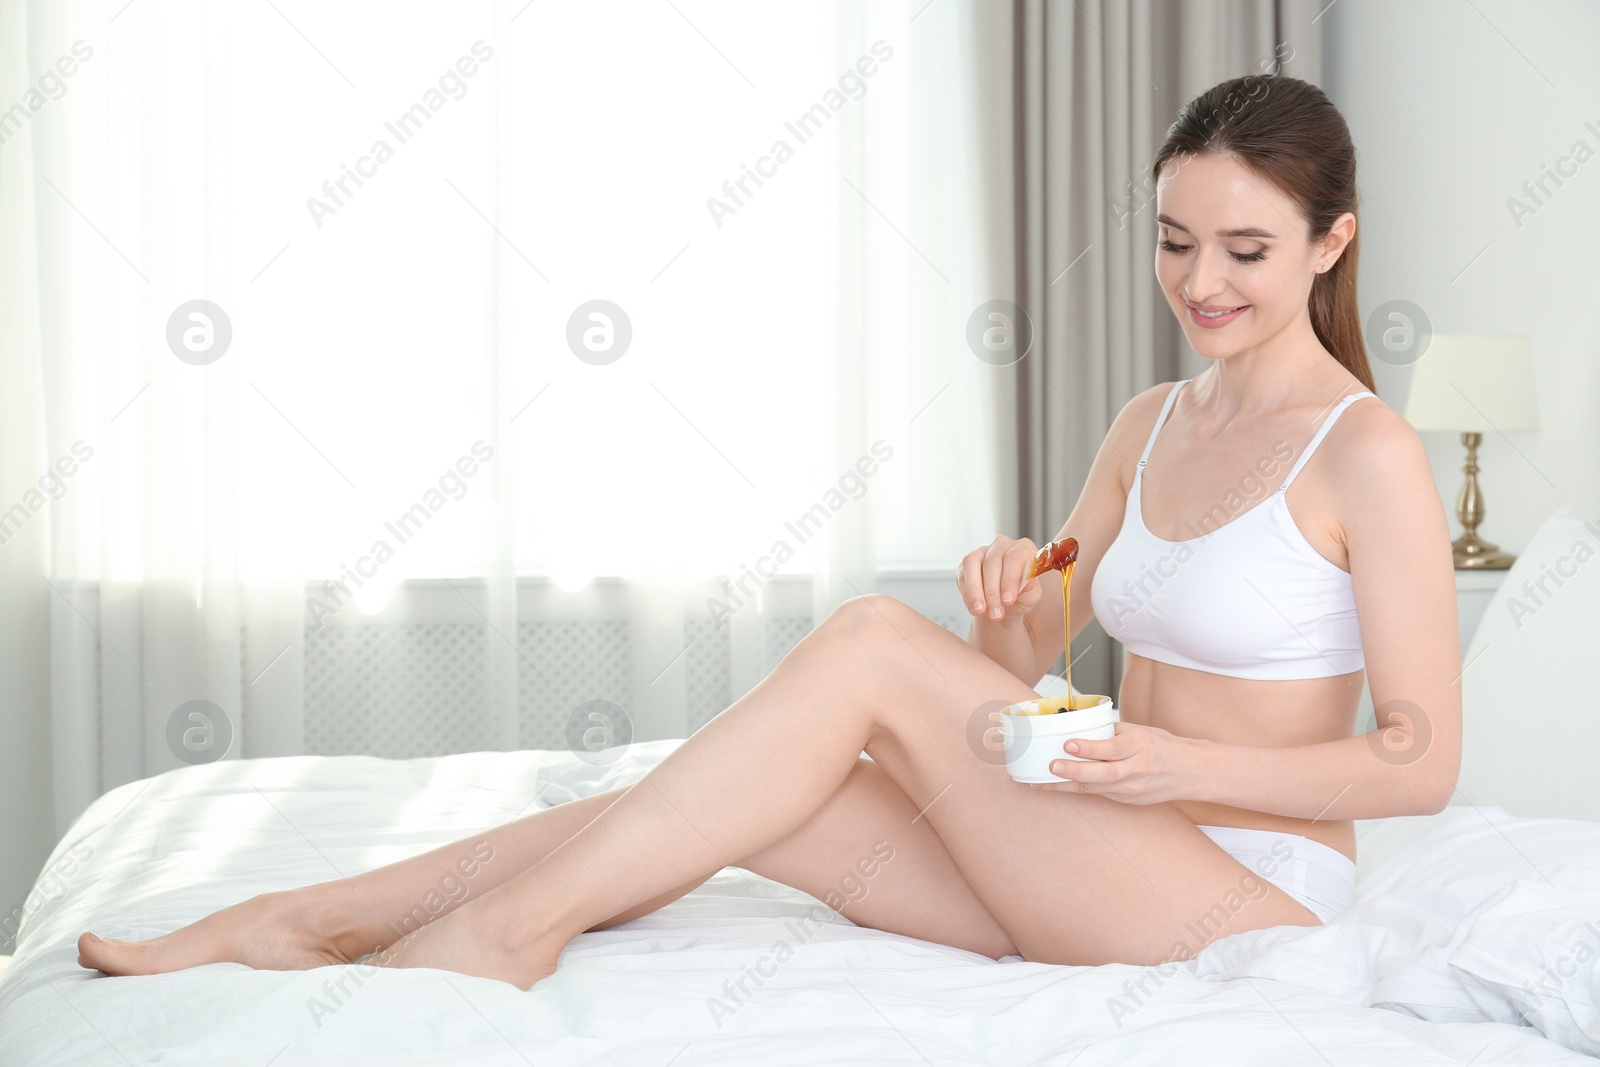 Photo of Smiling young woman holding hot wax for epilation procedure on bed at home. Space for text